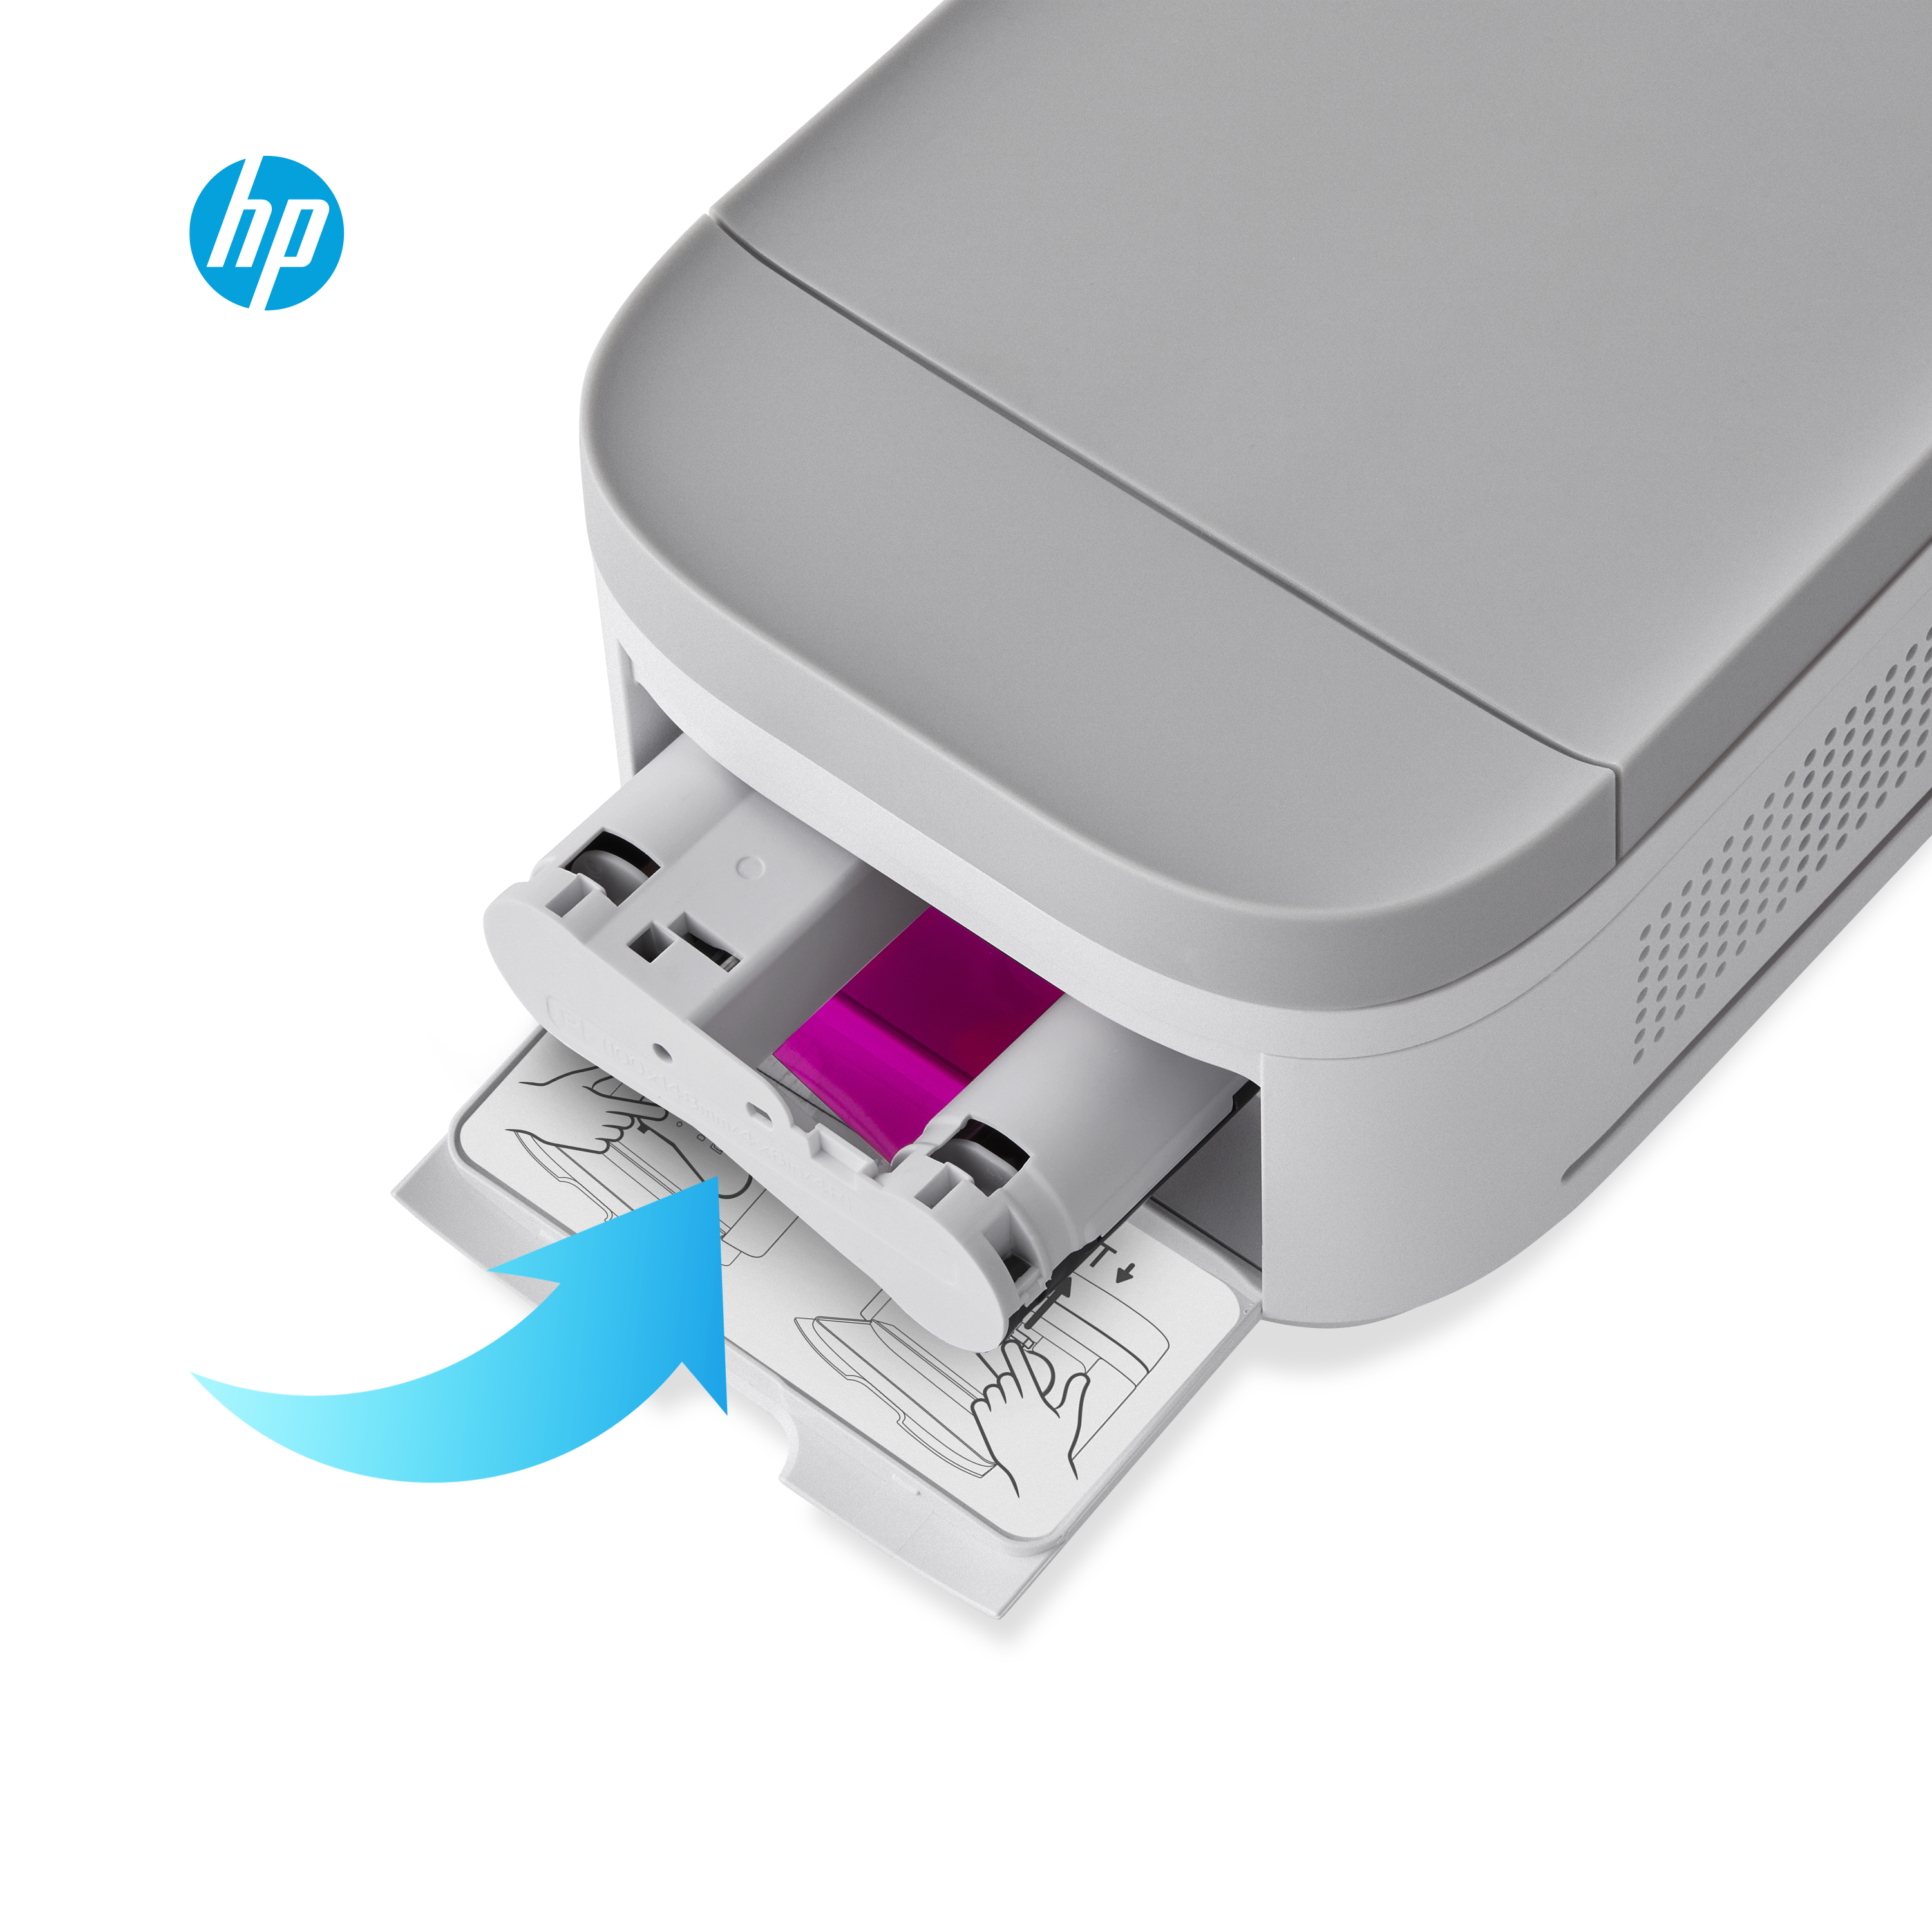 What is the HP Sprocket 100? Should I buy it? Is it the printer good?